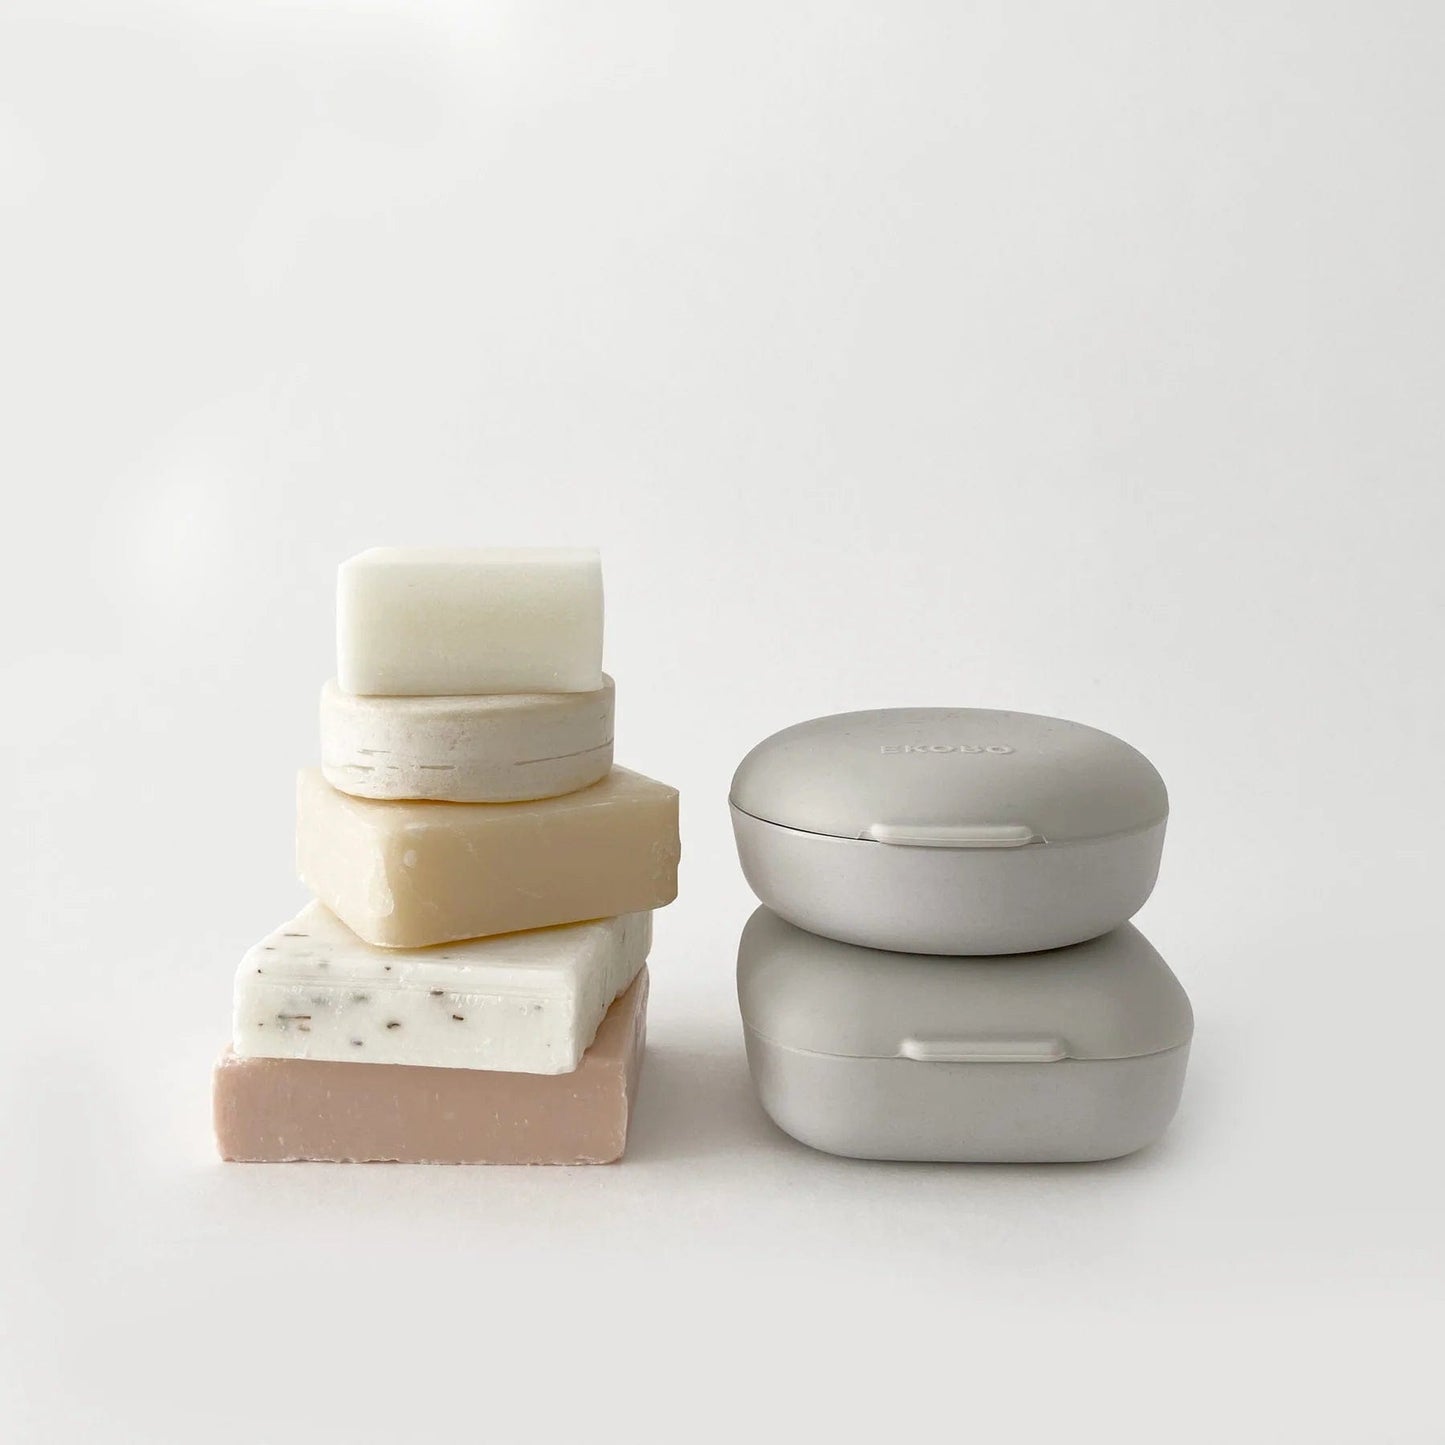 Faerly Soap Dishes & Holders Duo of Travel Soap Boxes - Cloud Grey - Ekobo